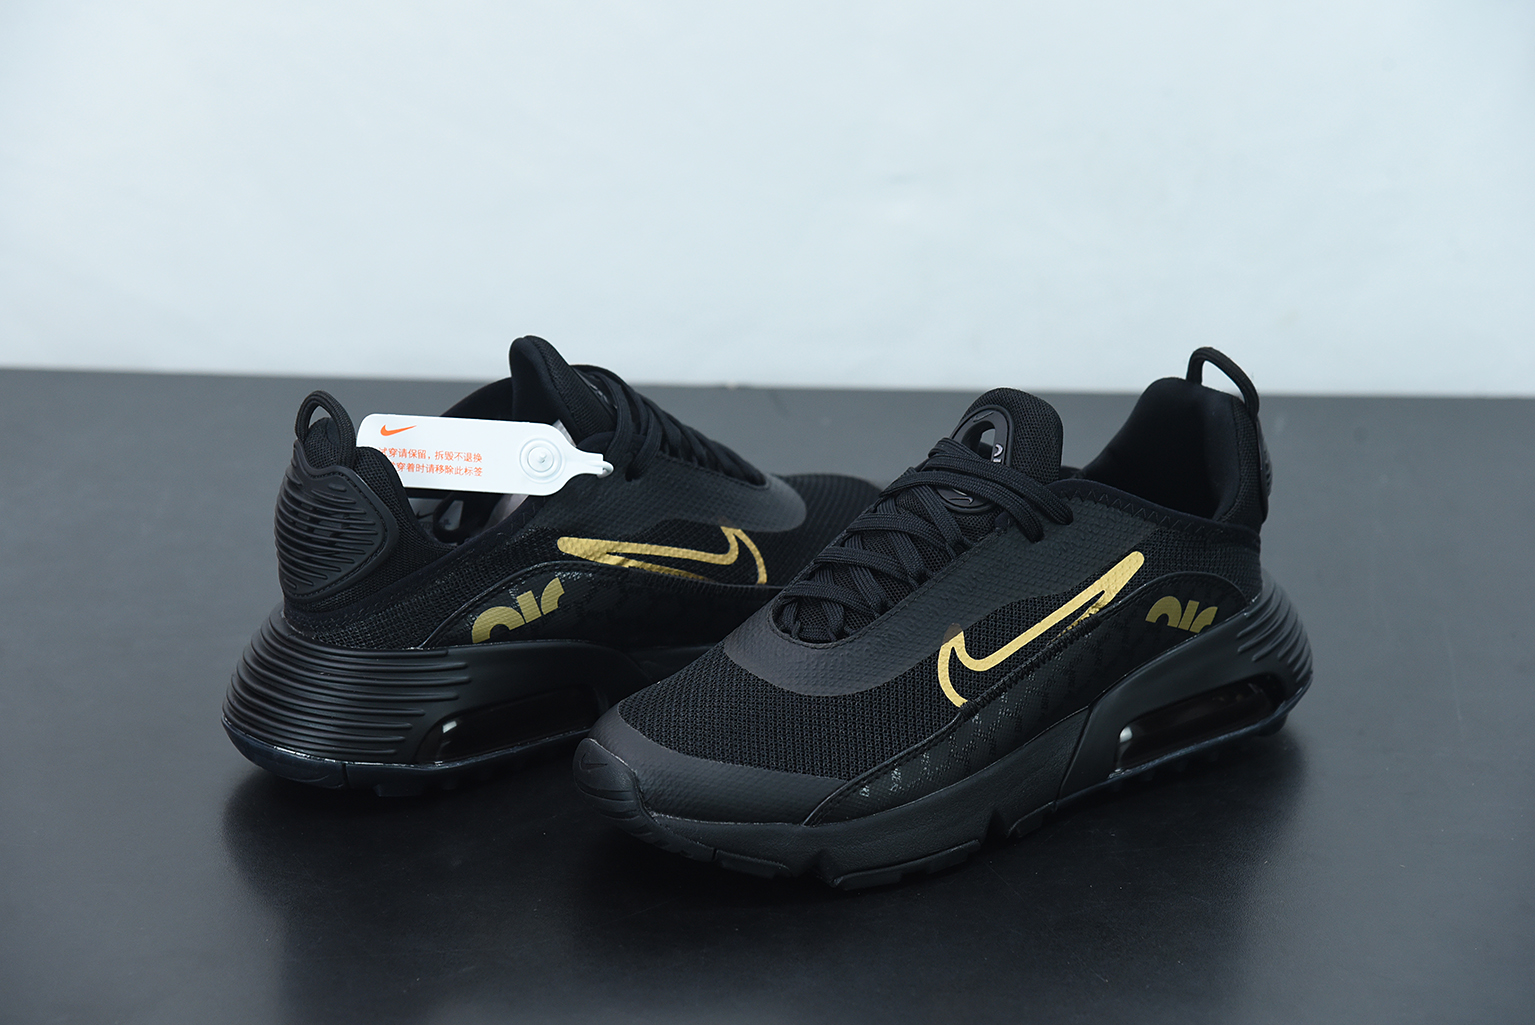 zuur voorraad Soldaat 001 For Sale – Tra-incShops - Nike Air Max 2090 Black Metallic Gold DC4120  - nike air trainer huarache cool blue for sale 2017